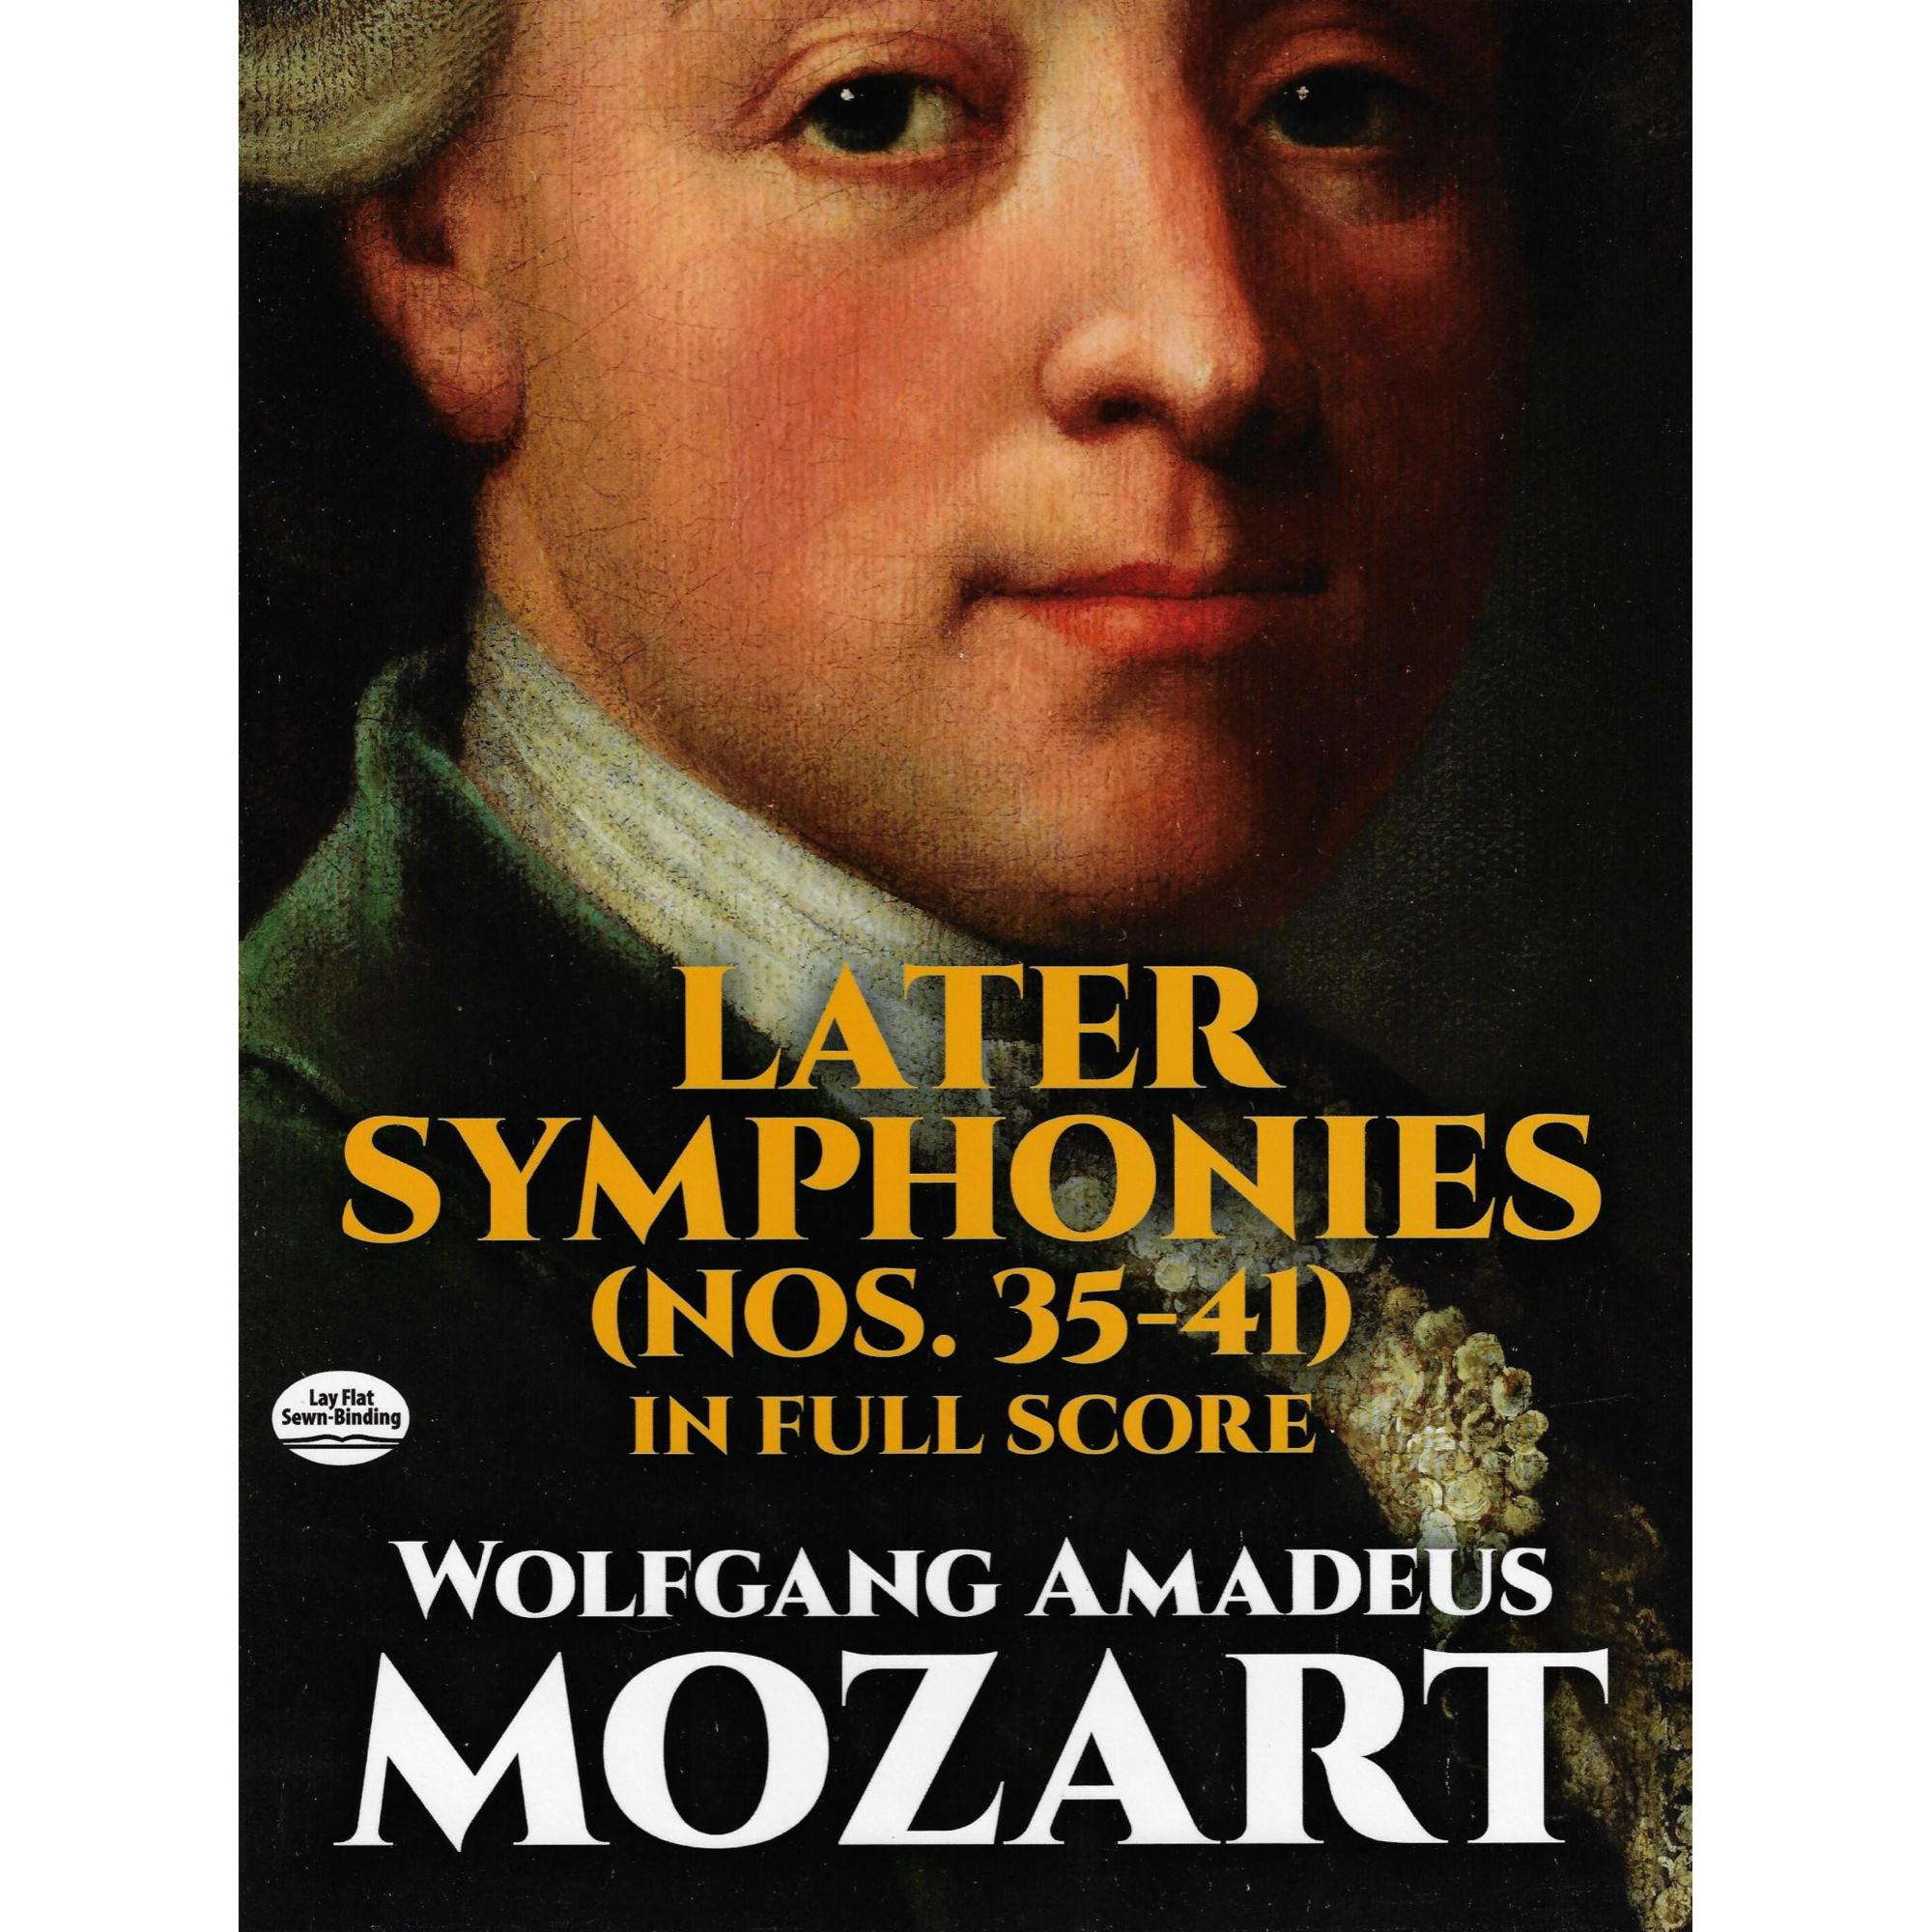 Mozart -- Later Symphonies (Nos. 35-41) in Full Score